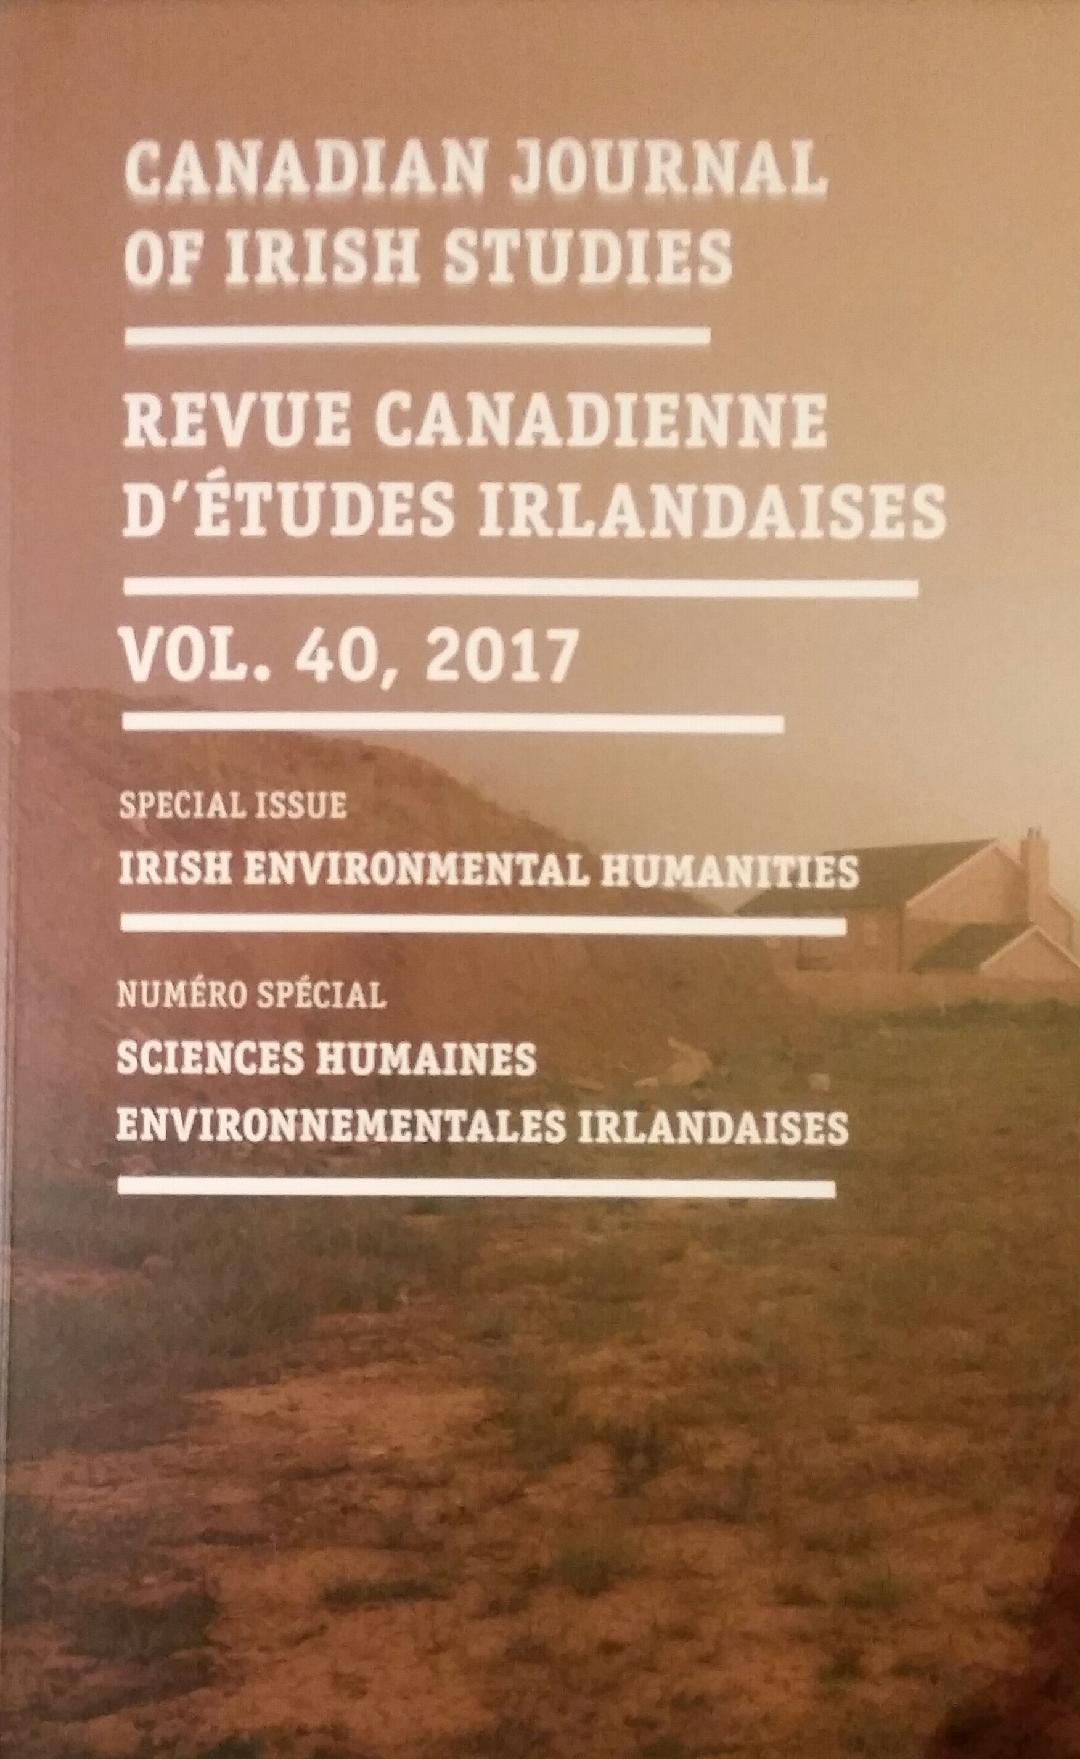 The School's Dr Maureen O'Connor has guest-edited the Canadian Journal of Irish Studies